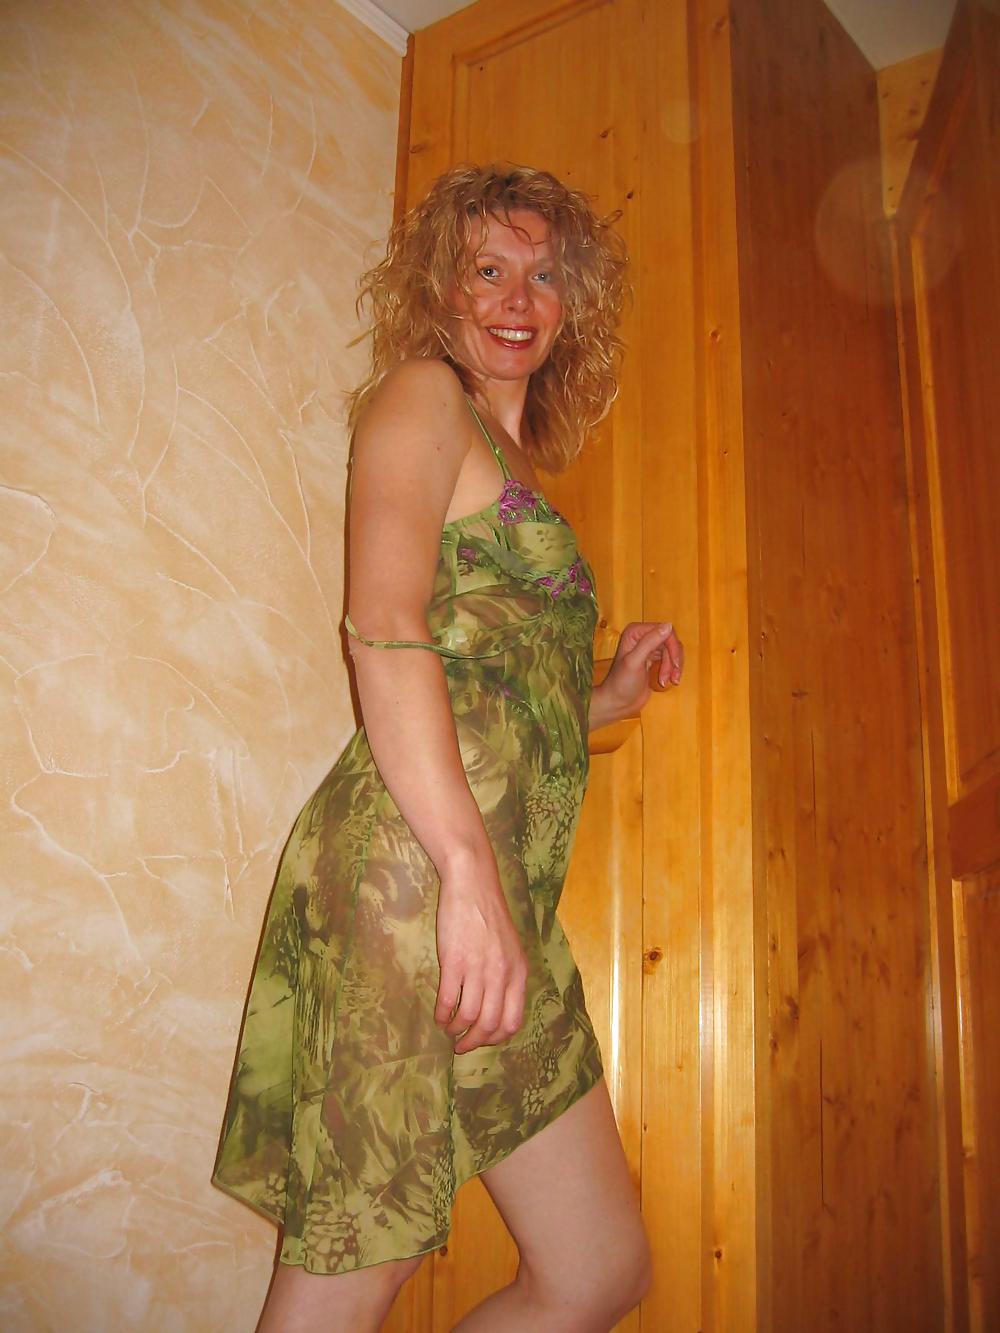 Another Gorgeous Milf named Bea #7916400